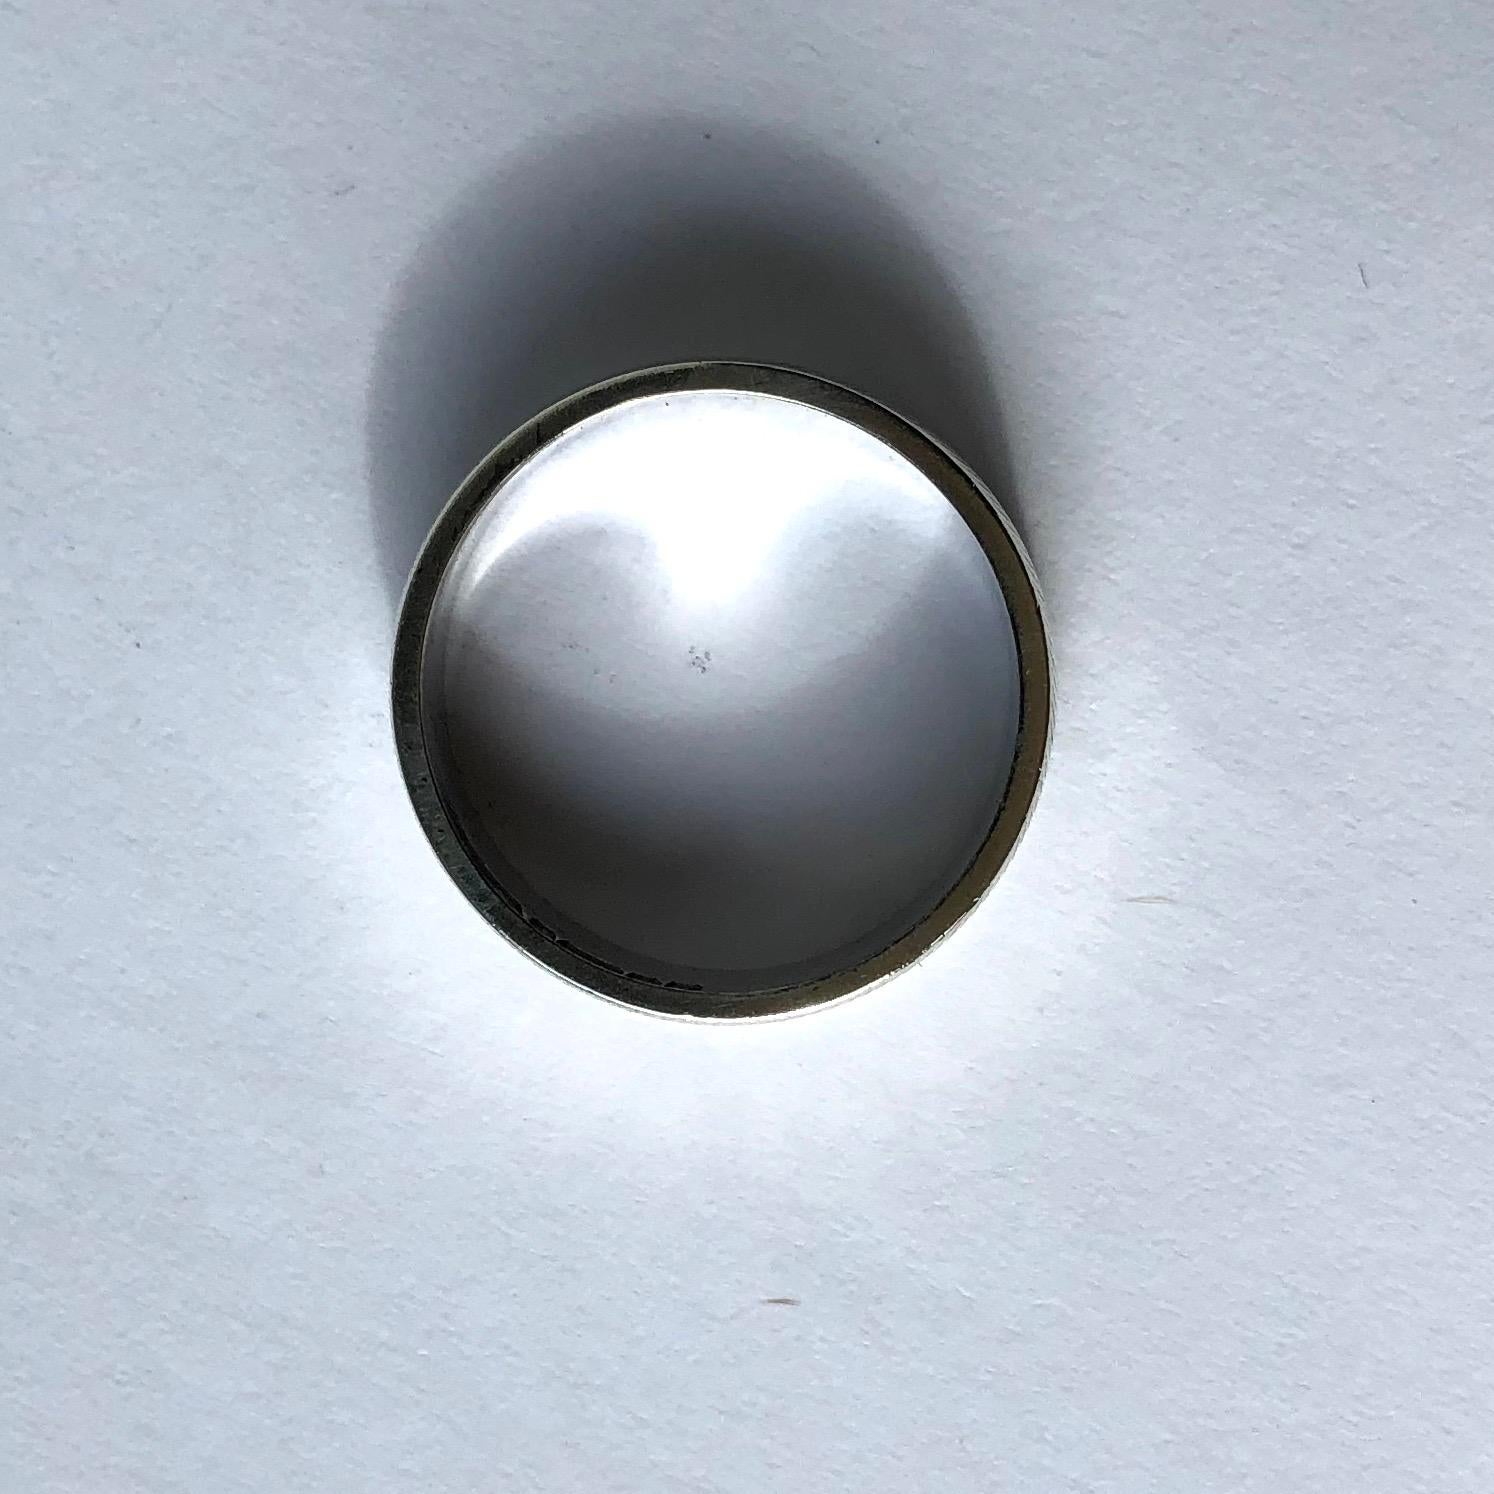 A sweet finely engraved 9ct white gold band. Perfect for a simple every day ring or ornate wedding band.

Ring Size: M 1/2 or 6 1/2
Band Width: 5mm

Weight: 3.9g